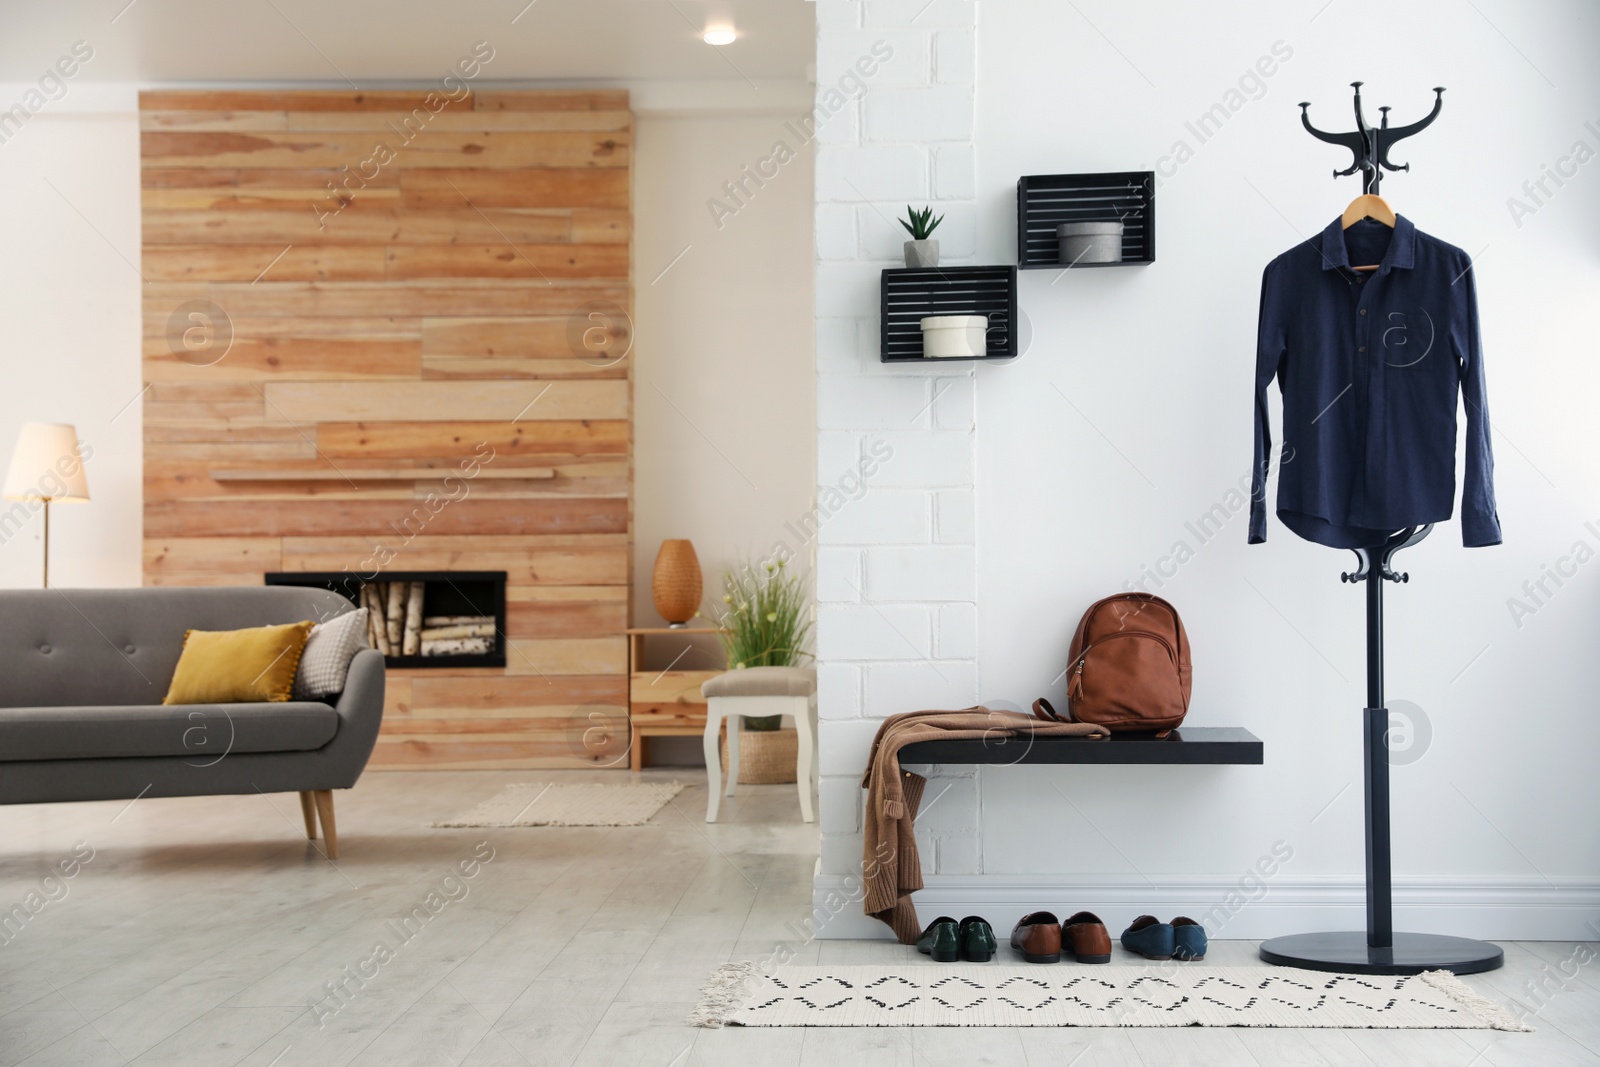 Photo of Hallway interior with stylish furniture, clothes and accessories